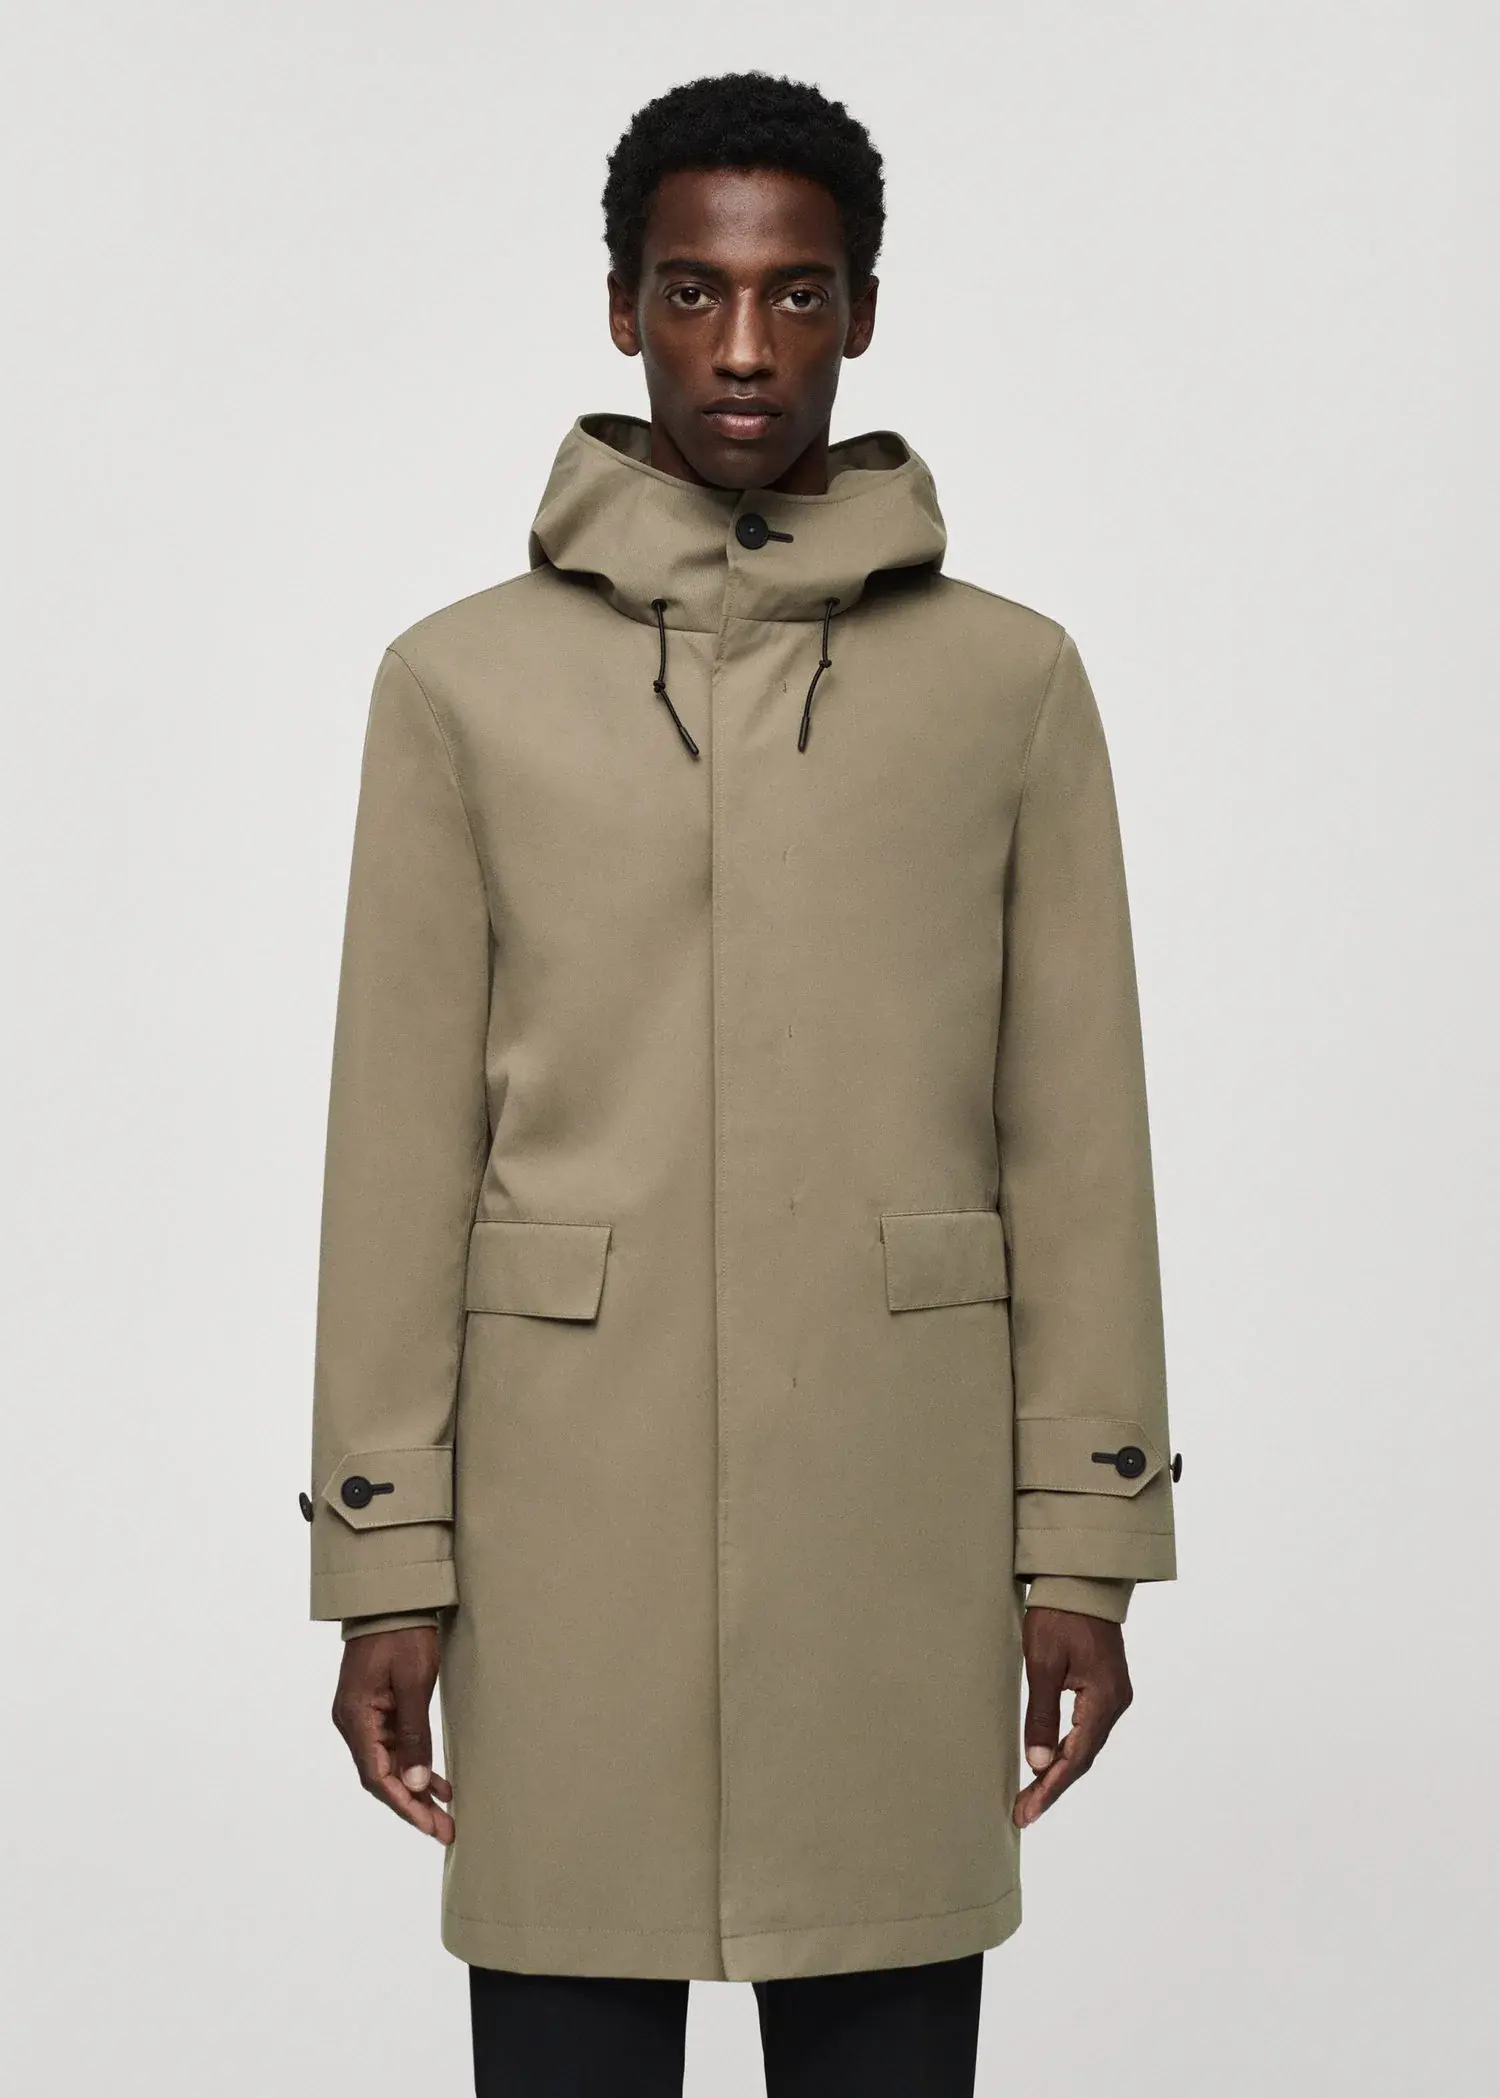 Mango Water-repellent hooded parka. 3